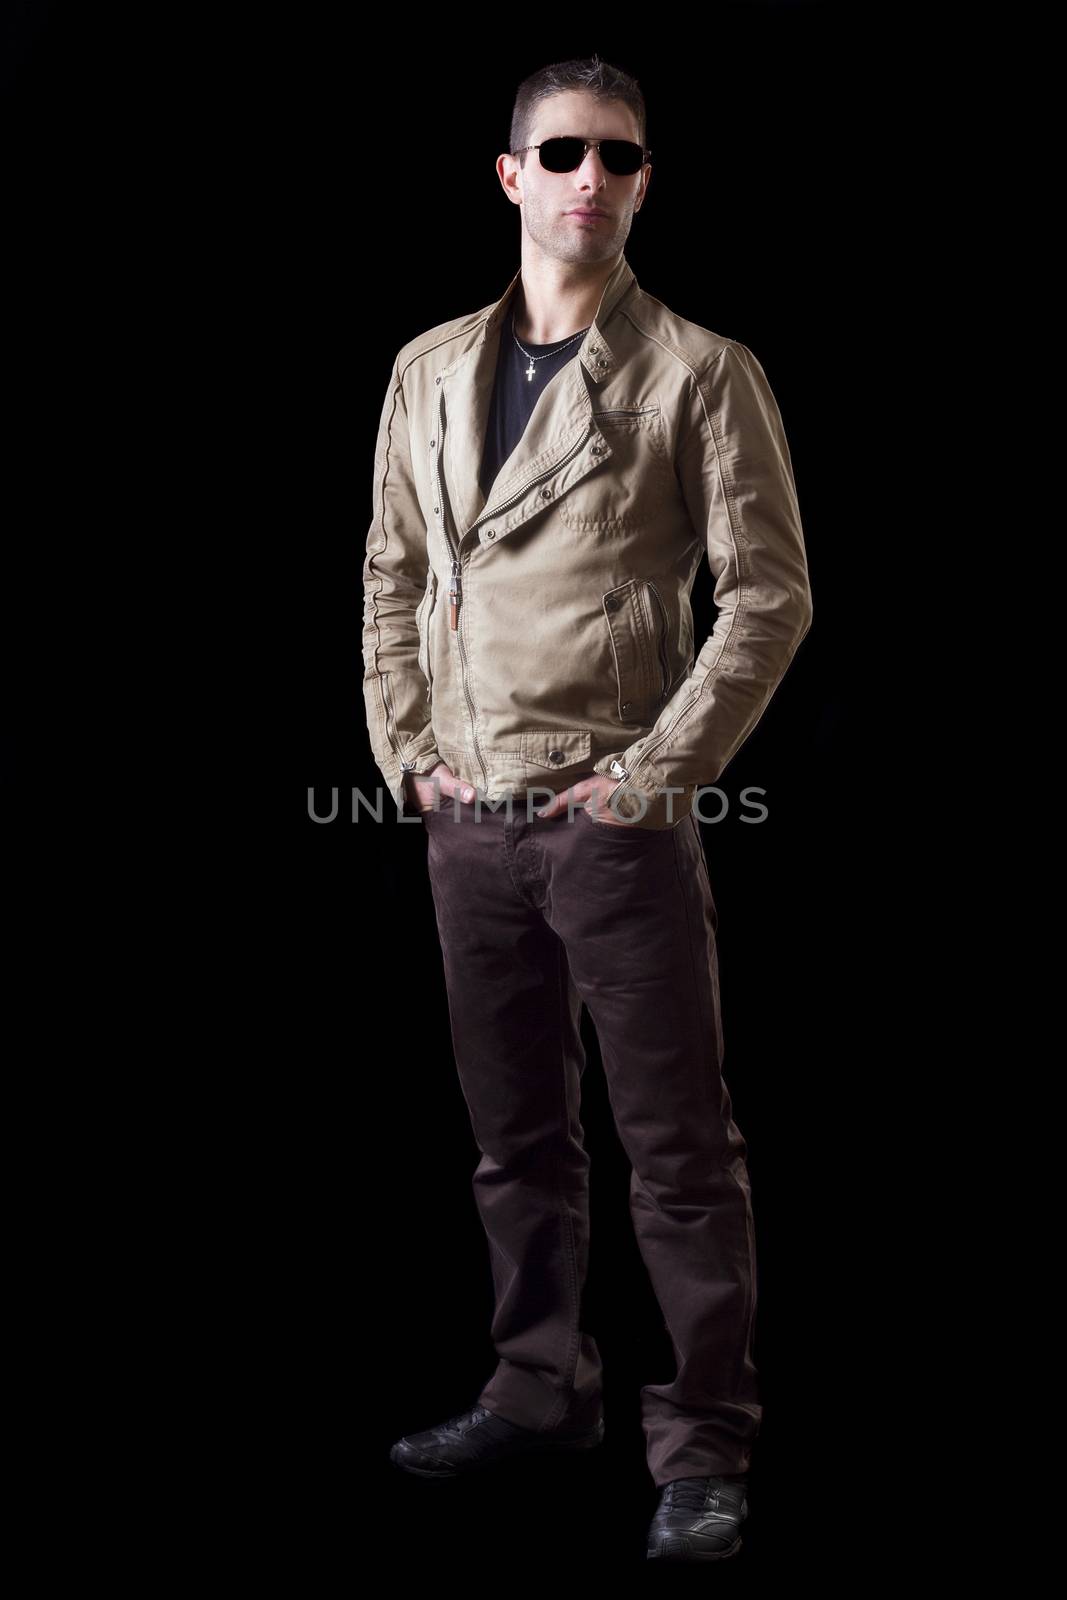 View of a young urban styled fashioned man standing isolated on a black background.